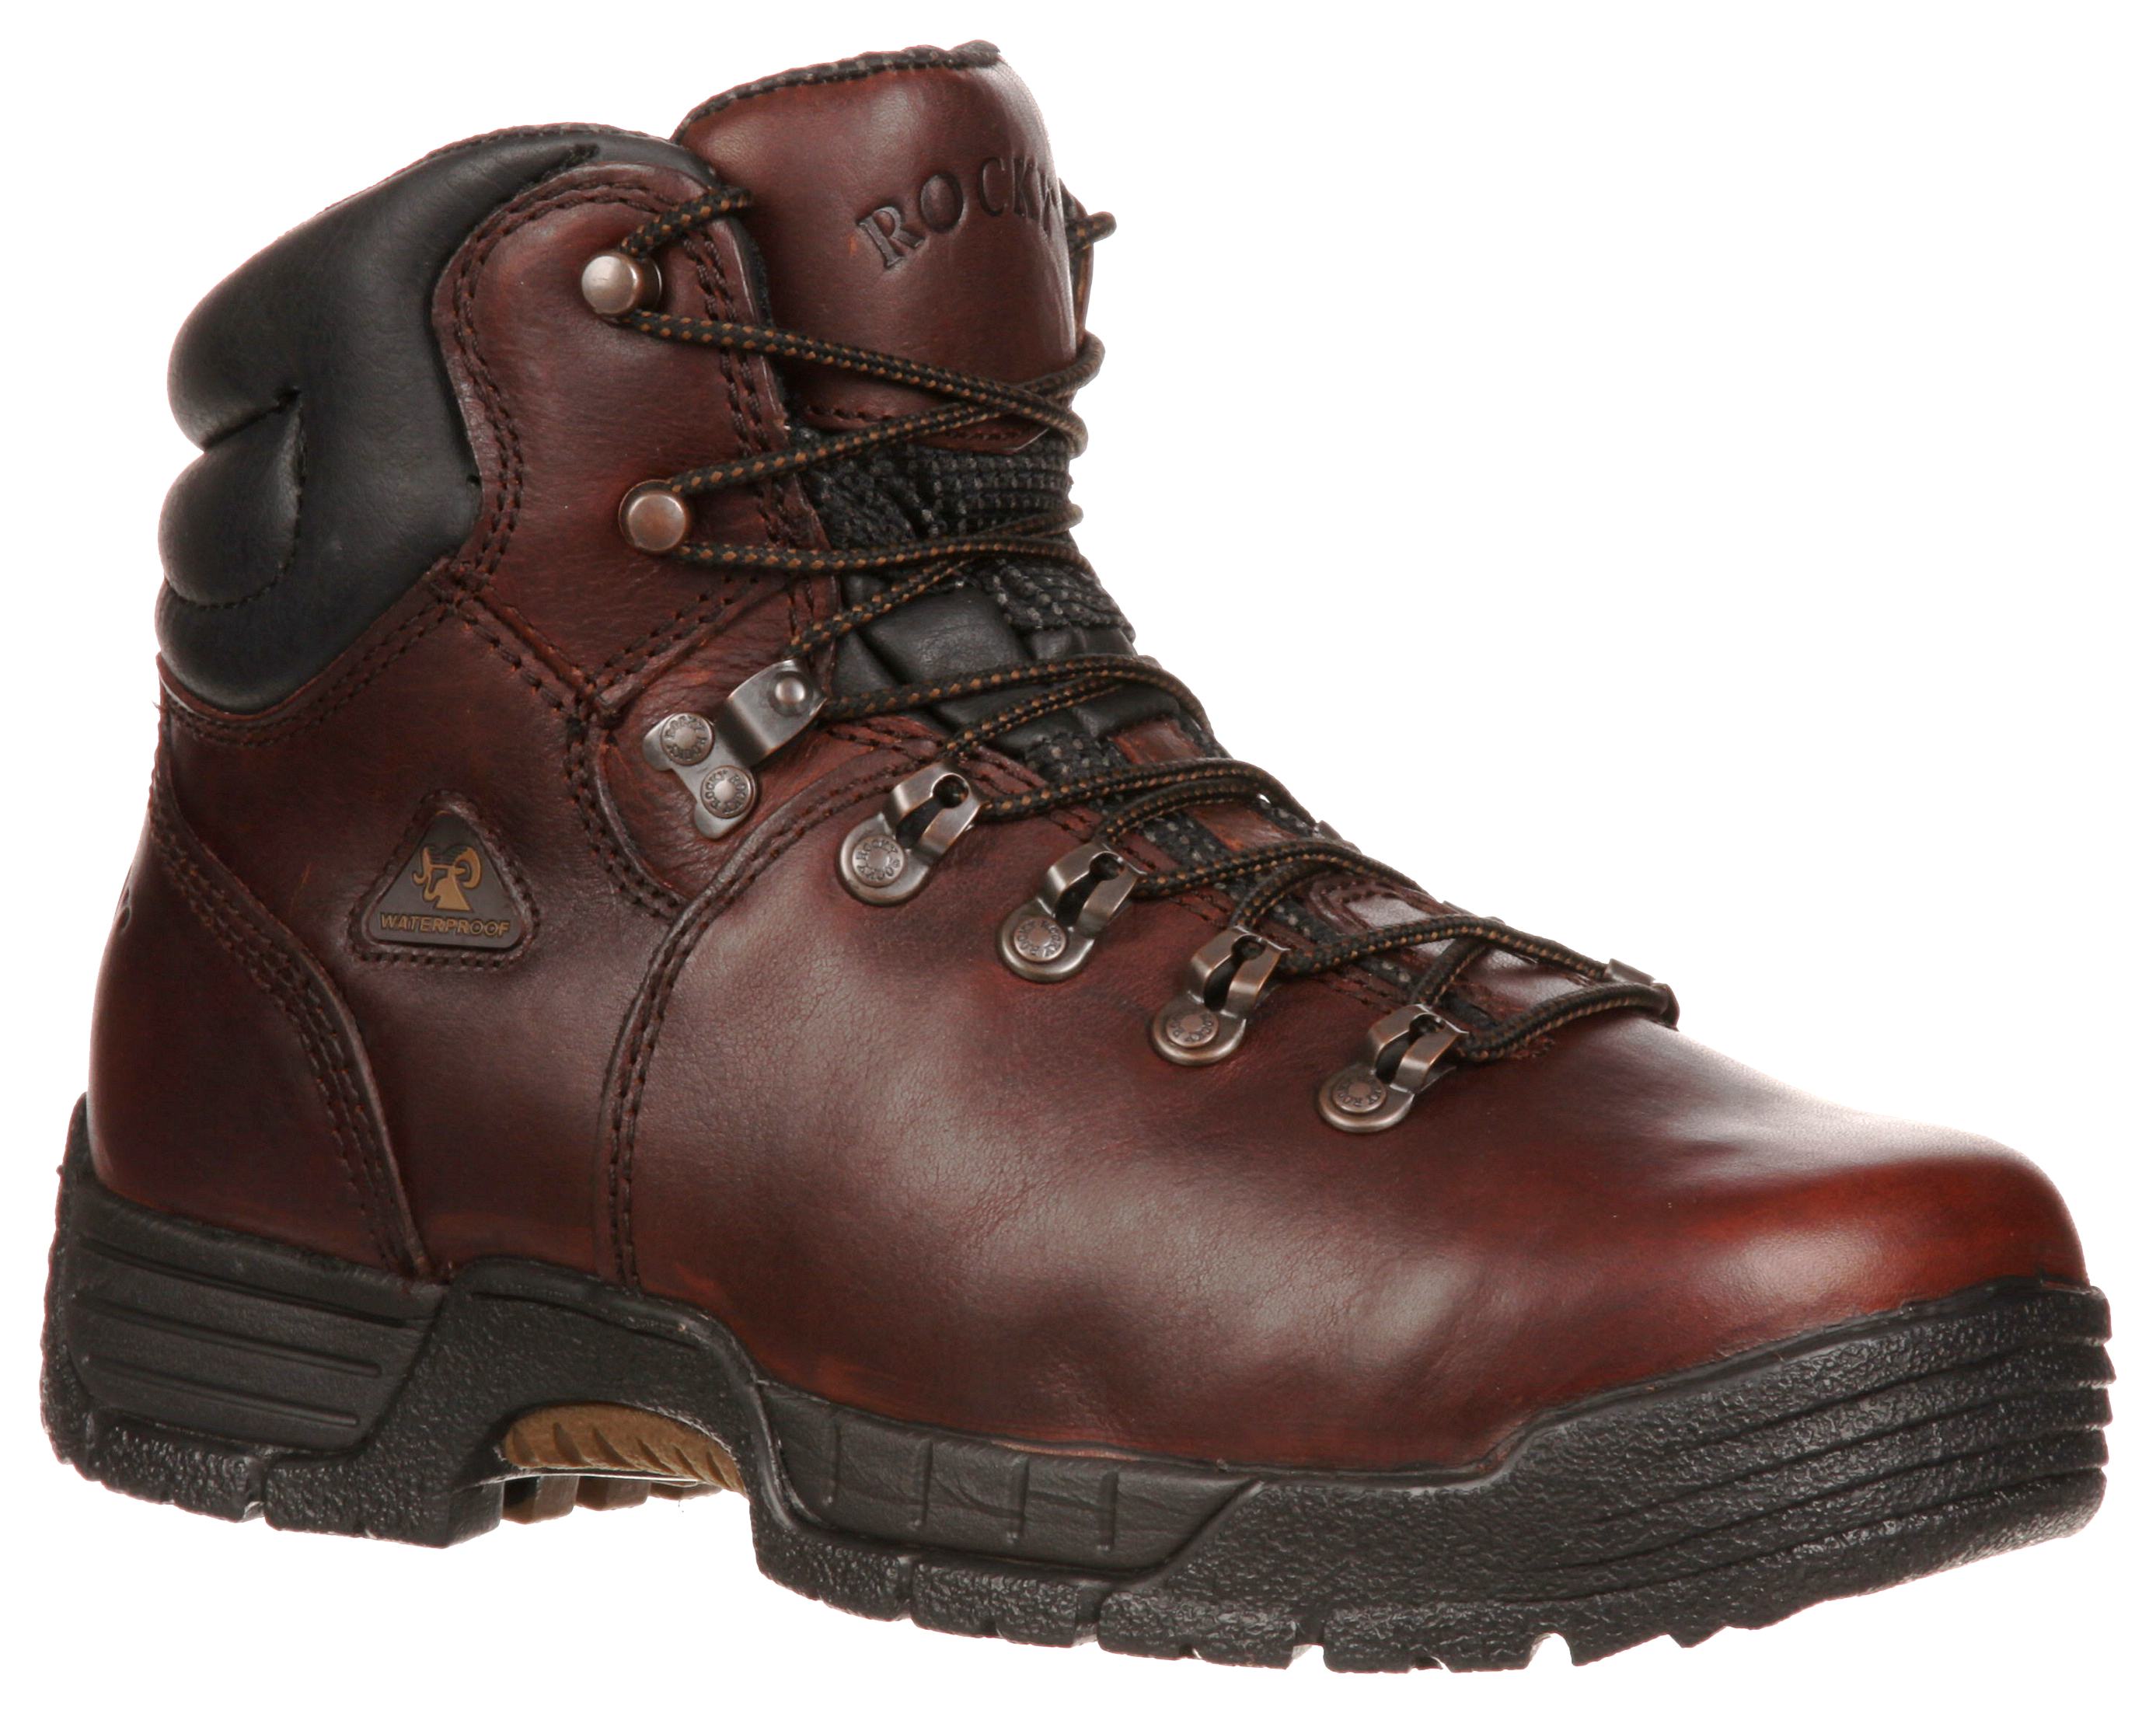 ROCKY MobiLite Waterproof Work Boots for Men - Brown - 9.5 M